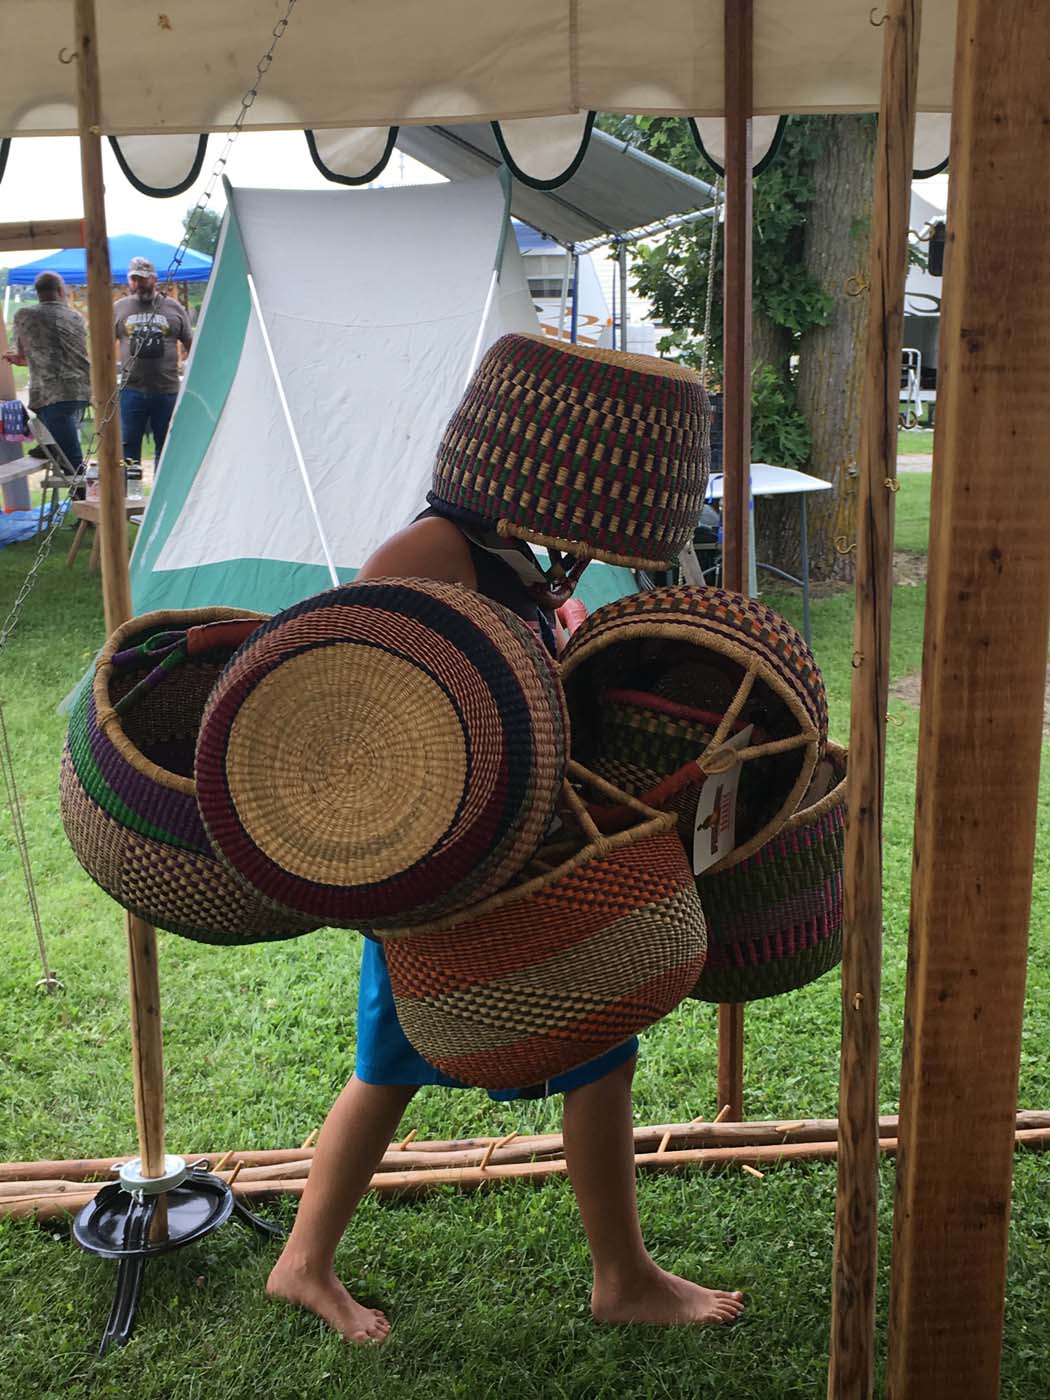 Shaping baskets transforms them into their full-bodied form